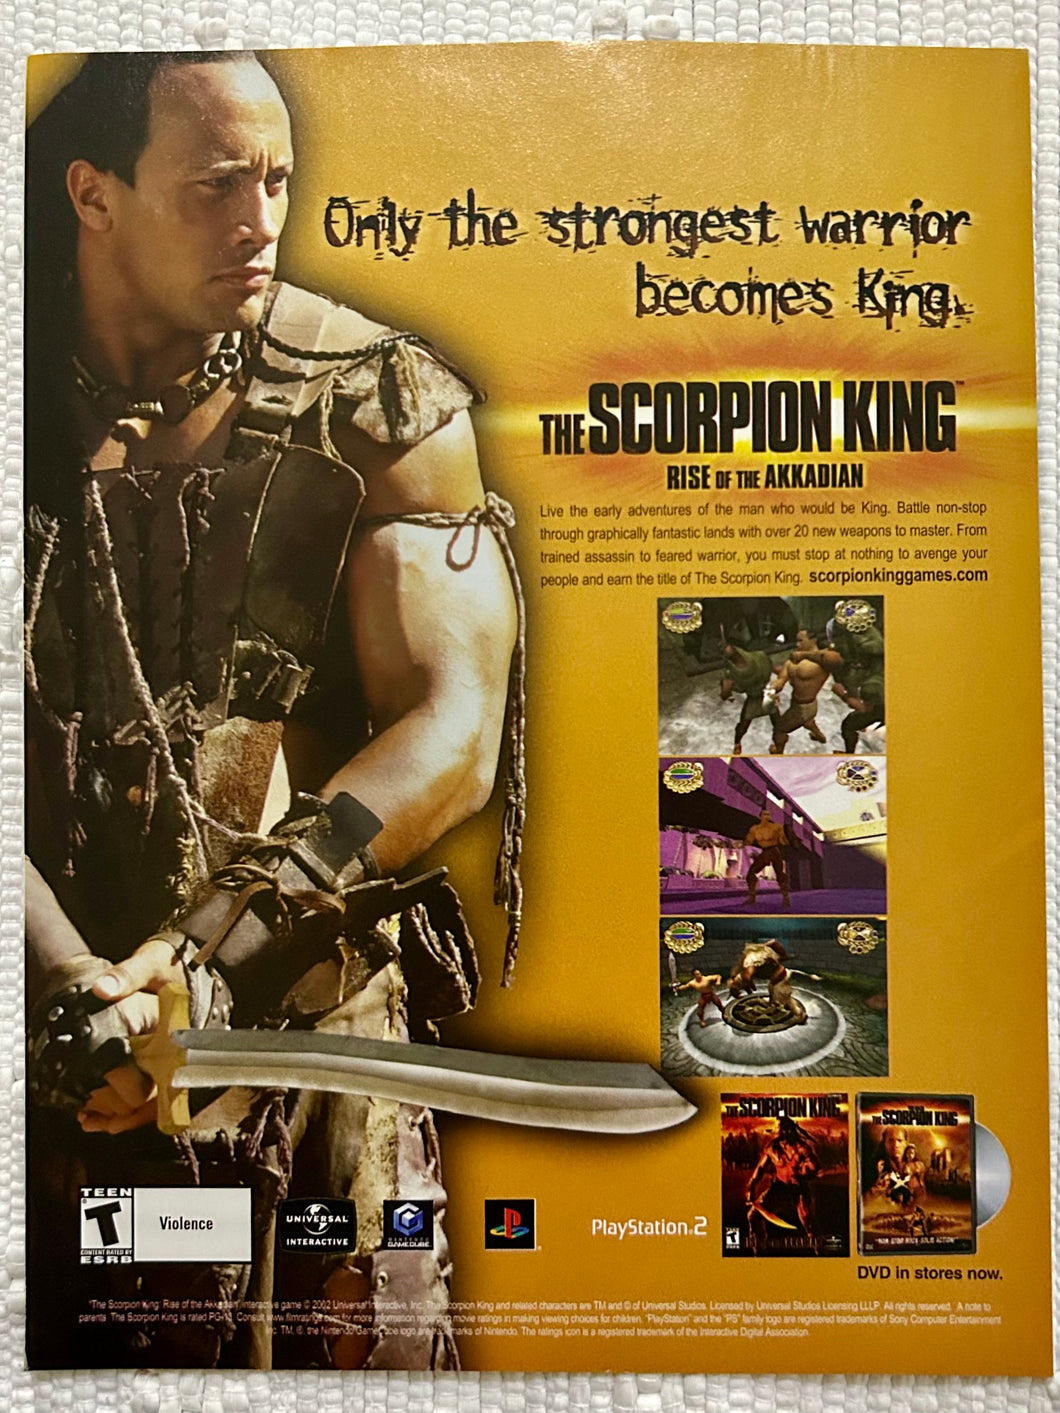 The Scorpion King: Rise of the Akkadian - PS2 NGC - Original Vintage Advertisement - Print Ads - Laminated A4 Poster